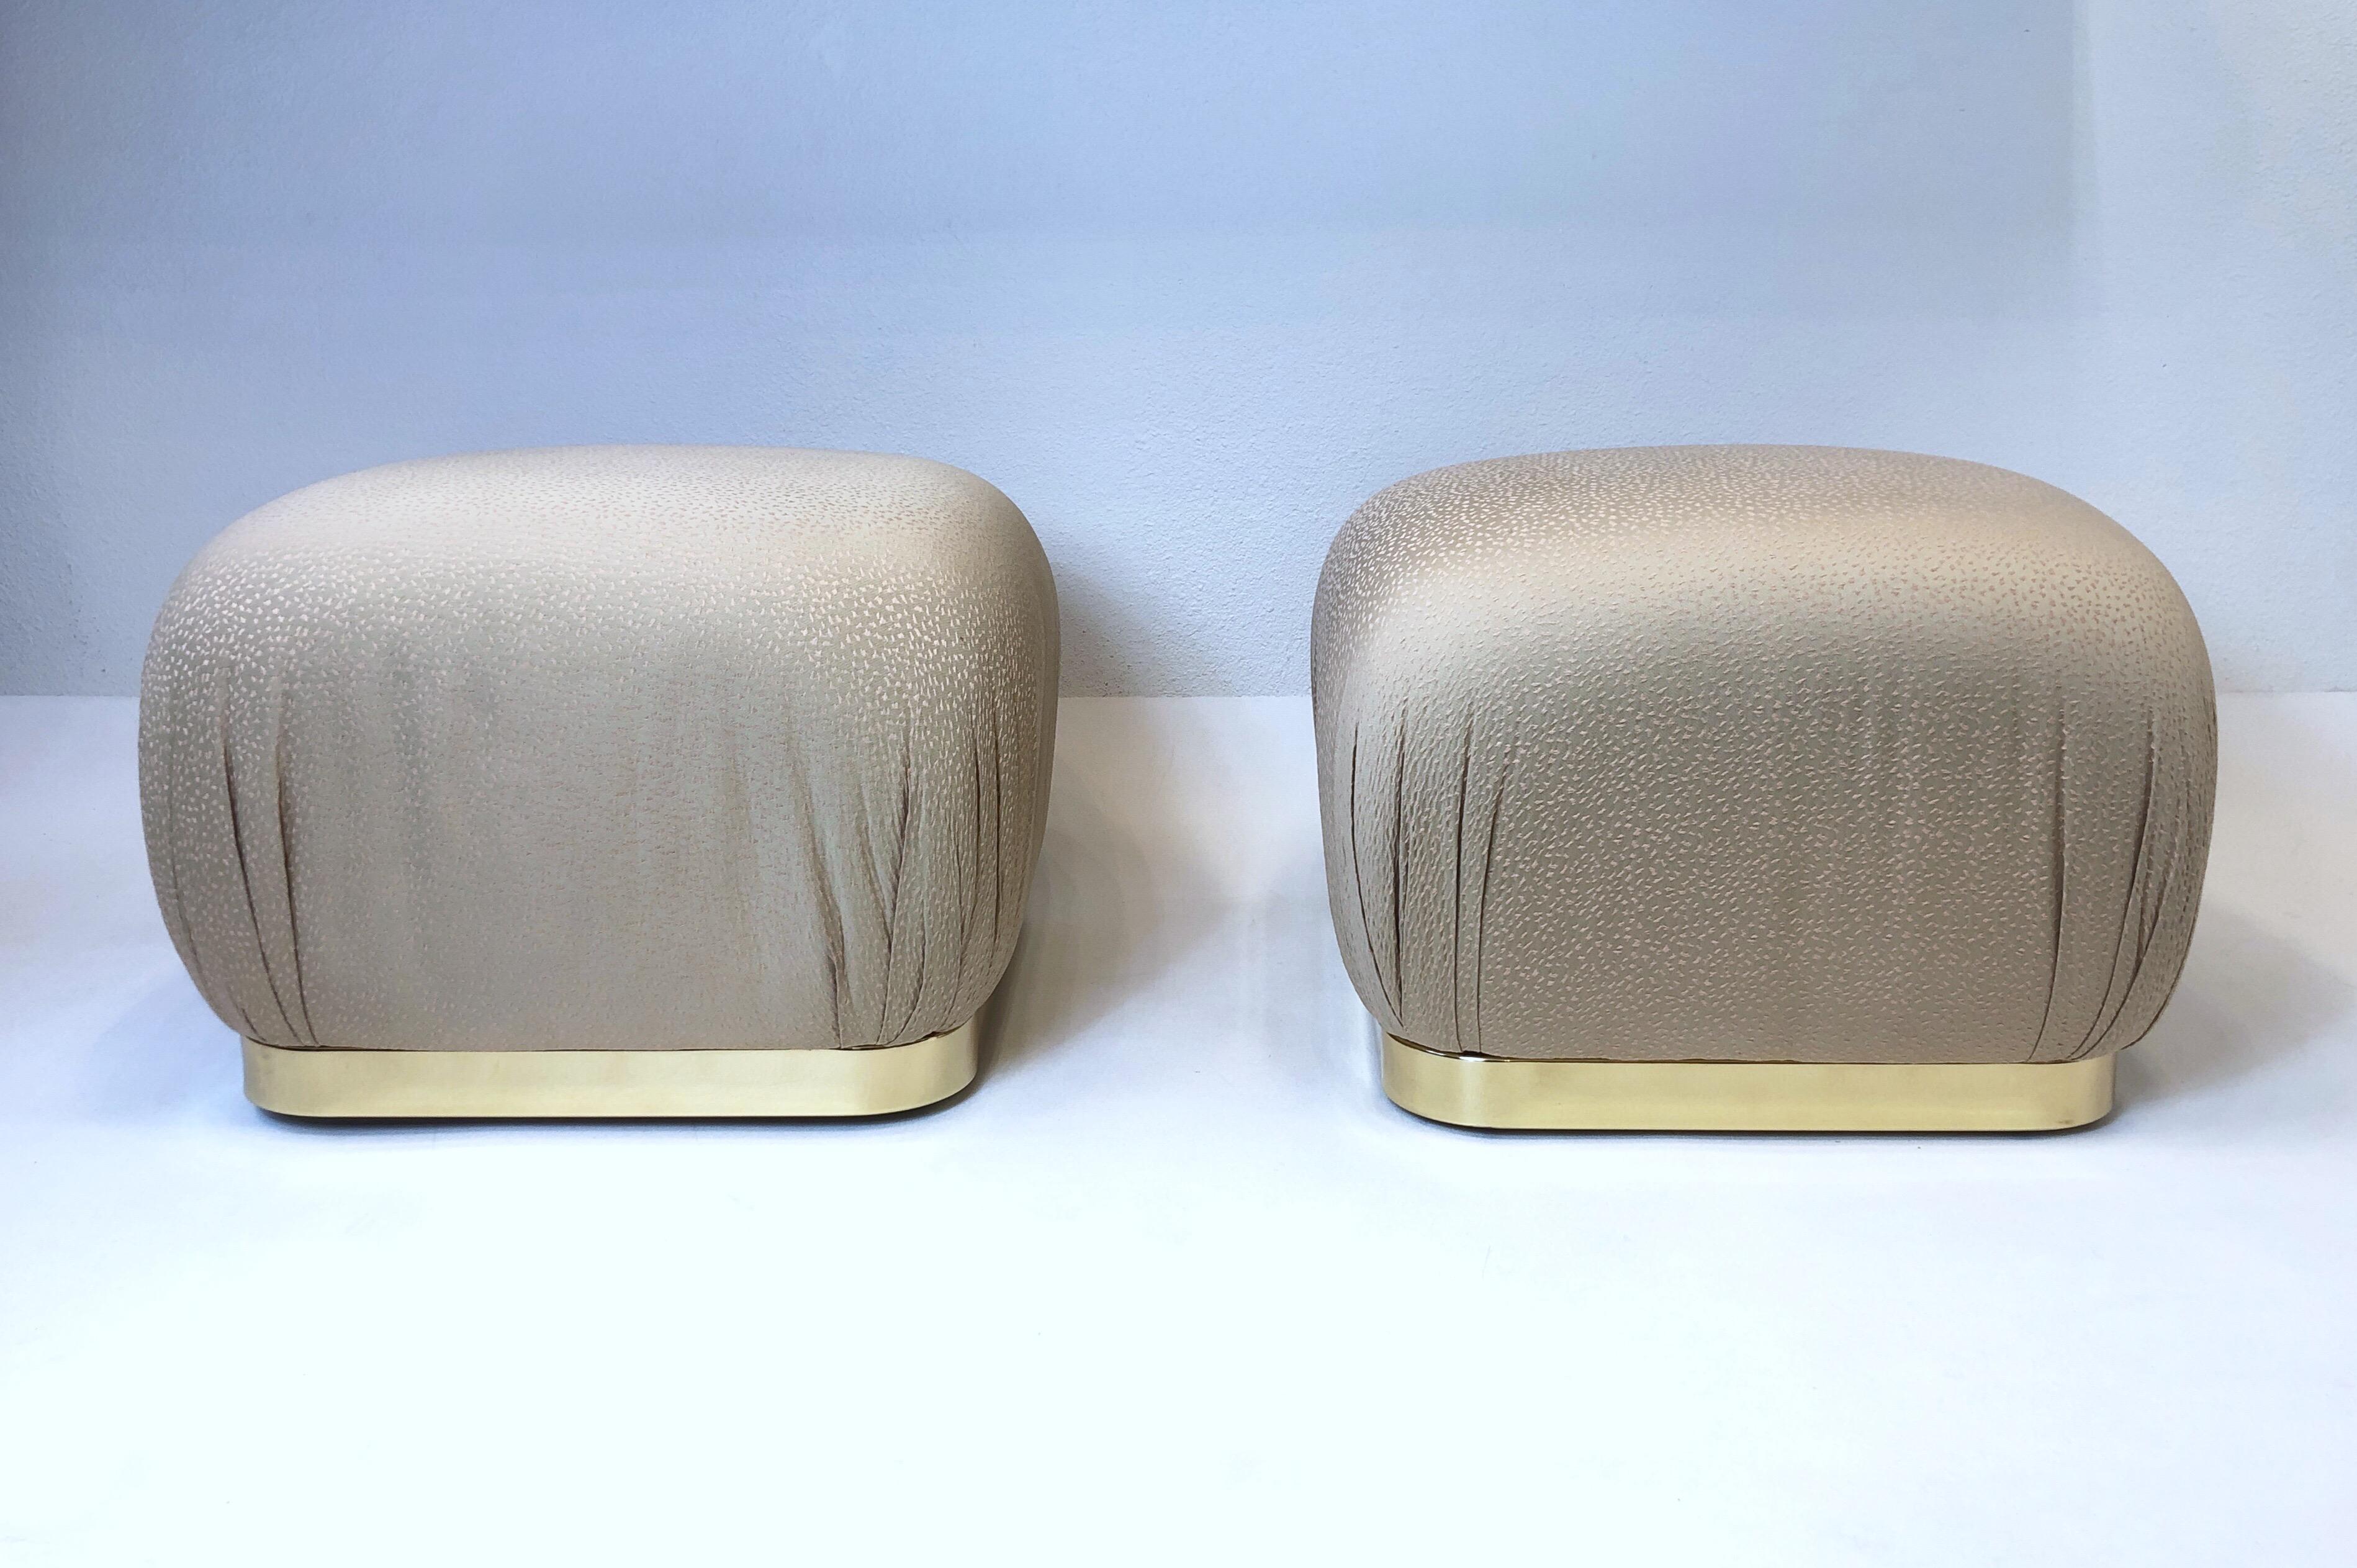 Glamorous pair of polish brass and fabric on casters poufs by Weiman Company.
This came out of a Steve Chase design estate and are in beautiful original condition.
Measurements: 23” Wide 23” Deep 17” High.